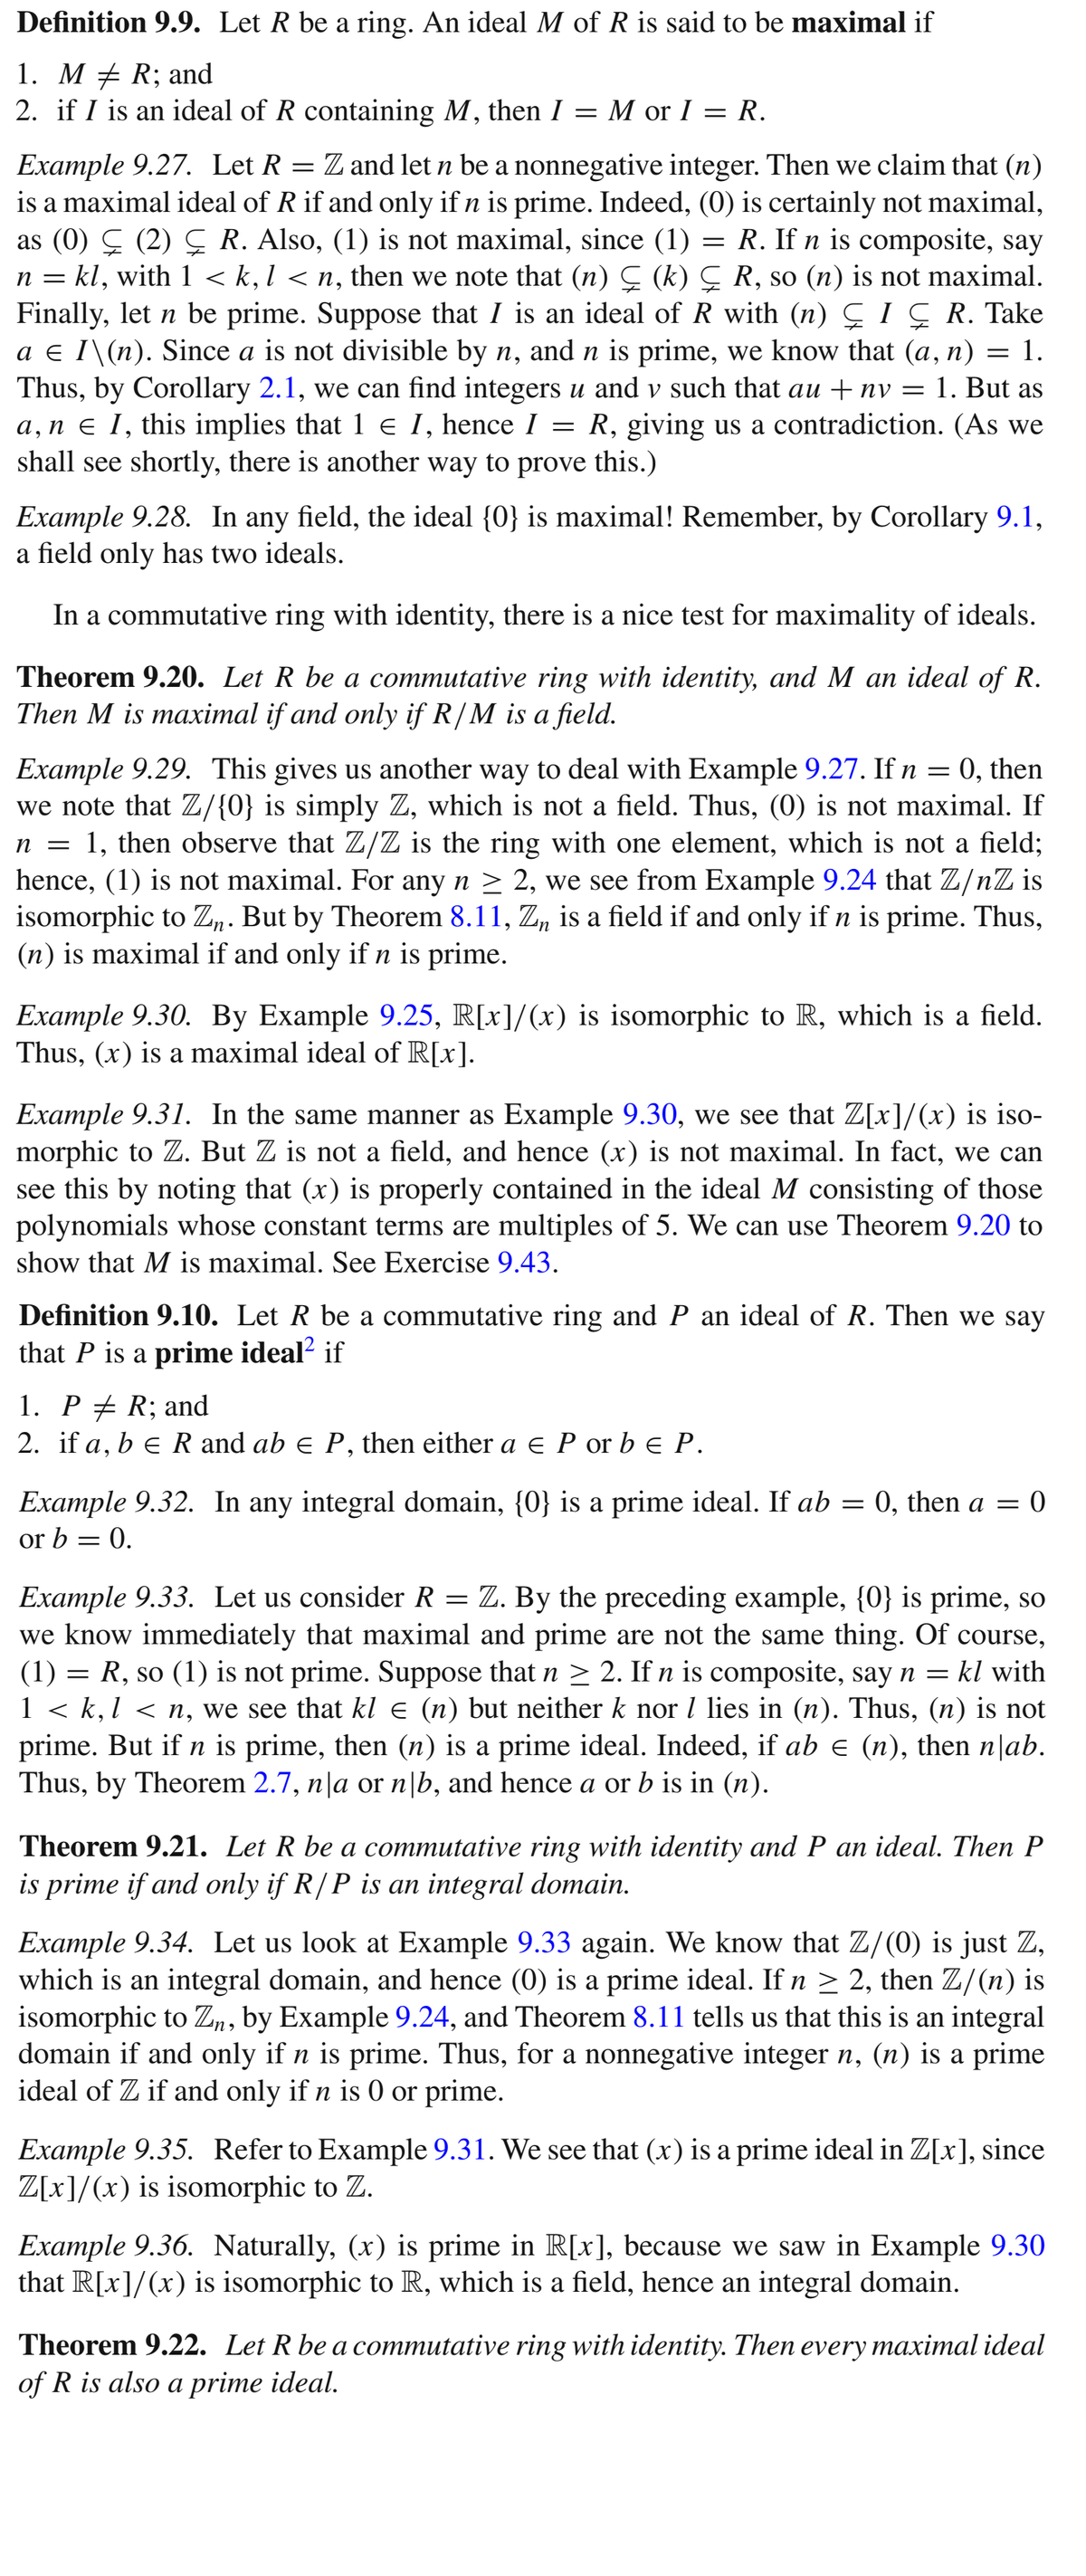 Definition 9.9. Let R be a ring. An ideal M of R is said to be maximal if
1. M + R; and
2. if I is an ideal of R containing M, then I = M or I = R.
Example 9.27. Let R = Z and let n be a nonnegative integer. Then we claim that (n)
is a maximal ideal of Rif and only if n is prime. Indeed, (0) is certainly not maximal,
as (0) Ç (2) Ç R. Also, (1) is not maximal, since (1) = R. If n is composite, say
n = kl, with 1 < k,l < n, then we note that (n) Ç (k) Ç R, so (n) is not maximal.
Finally, let n be prime. Suppose that I is an ideal of R with (n) Ç IÇ R. Take
a e I\(n). Since a is not divisible by n, and n is prime, we know that (a, n) = 1.
Thus, by Corollary 2.1, we can find integers u and v such that au + nv =
a, n ɛ I, this implies that 1 e I, hence I = R, giving us a contradiction. (As we
shall see shortly, there is another way to prove this.)
1. But as
Example 9.28. In any field, the ideal {0} is maximal! Remember, by Corollary 9.1,
a field only has two ideals.
In a commutative ring with identity, there is a nice test for maximality of ideals.
Theorem 9.20. Let R be a commutative ring with identity, and M an ideal of R.
Then M is maximal if and only if R/M is a field.
Example 9.29. This gives us another way to deal with Example 9.27. If n = 0, then
we note that Z/{0} is simply Z, which is not a field. Thus, (0) is not maximal. If
n = 1, then observe that Z/Z is the ring with one element, which is not a field;
hence, (1) is not maximal. For any n > 2, we see from Example 9.24 that Z/nZ is
isomorphic to Z„. But by Theorem 8.11, Z, is a field if and only if n is prime. Thus,
(n) is maximal if and only if n is prime.
Example 9.30. By Example 9.25, R[x]/(x) is isomorphic to R, which is a field.
Thus, (x) is a maximal ideal of R[x].
Example 9.31. In the same manner as Example 9.30, we see that Z[x]/(x) is iso-
morphic to Z. But Z is not a field, and hence (x) is not maximal. In fact, we can
see this by noting that (x) is properly contained in the ideal M consisting of those
polynomials whose constant terms are multiples of 5. We can use Theorem 9.20 to
show that M is maximal. See Exercise 9.43.
Definition 9.10. Let R be a commutative ring and P an ideal of R. Then we say
that P is a prime ideal? if
1. Р 2 R; and
2. if a, b e R and ab e P, then either a e P or b e P.
Example 9.32. In any integral domain, {0} is a prime ideal. If ab = 0, then a = 0
or b = 0.
Example 9.33. Let us consider R = Z. By the preceding example, {0} is prime, so
we know immediately that maximal and prime are not the same thing. Of course,
(1) = R, so (1) is not prime. Suppose that n > 2. If n is composite, say n = kl with
1 < k,l < n, we see that kl e (n) but neither k nor l lies in (n). Thus, (n) is not
prime. But if n is prime, then (n) is a prime ideal. Indeed, if ab e (n), then n|ab.
Thus, by Theorem 2.7, n|a or n|b, and hence a or b is in (n).
Theorem 9.21. Let R be a commutative ring with identity and P an ideal. Then P
is prime if and only if R/P is an integral domain.
Example 9.34. Let us look at Example 9.33 again. We know that Z/(0) is just Z,
which is an integral domain, and hence (0) is a prime ideal. If n > 2, then Z/(n) is
isomorphic to Zn, by Example 9.24, and Theorem 8.11 tells us that this is an integral
domain if and only if n is prime. Thus, for a nonnegative integer n, (n) is a prime
ideal of Z if and only if n is 0 or prime.
Example 9.35. Refer to Example 9.31. We see that (x) is a prime ideal in Z[x], since
Z[x]/(x) is isomorphic to Z.
Example 9.36. Naturally, (x) is prime in R[x], because we saw in Example 9.30
that R[x]/(x) is isomorphic to R, which is a field, hence an integral domain.
Theorem 9.22. Let R be a commutative ring with identity. Then every maximal ideal
of R is also a prime ideal.
